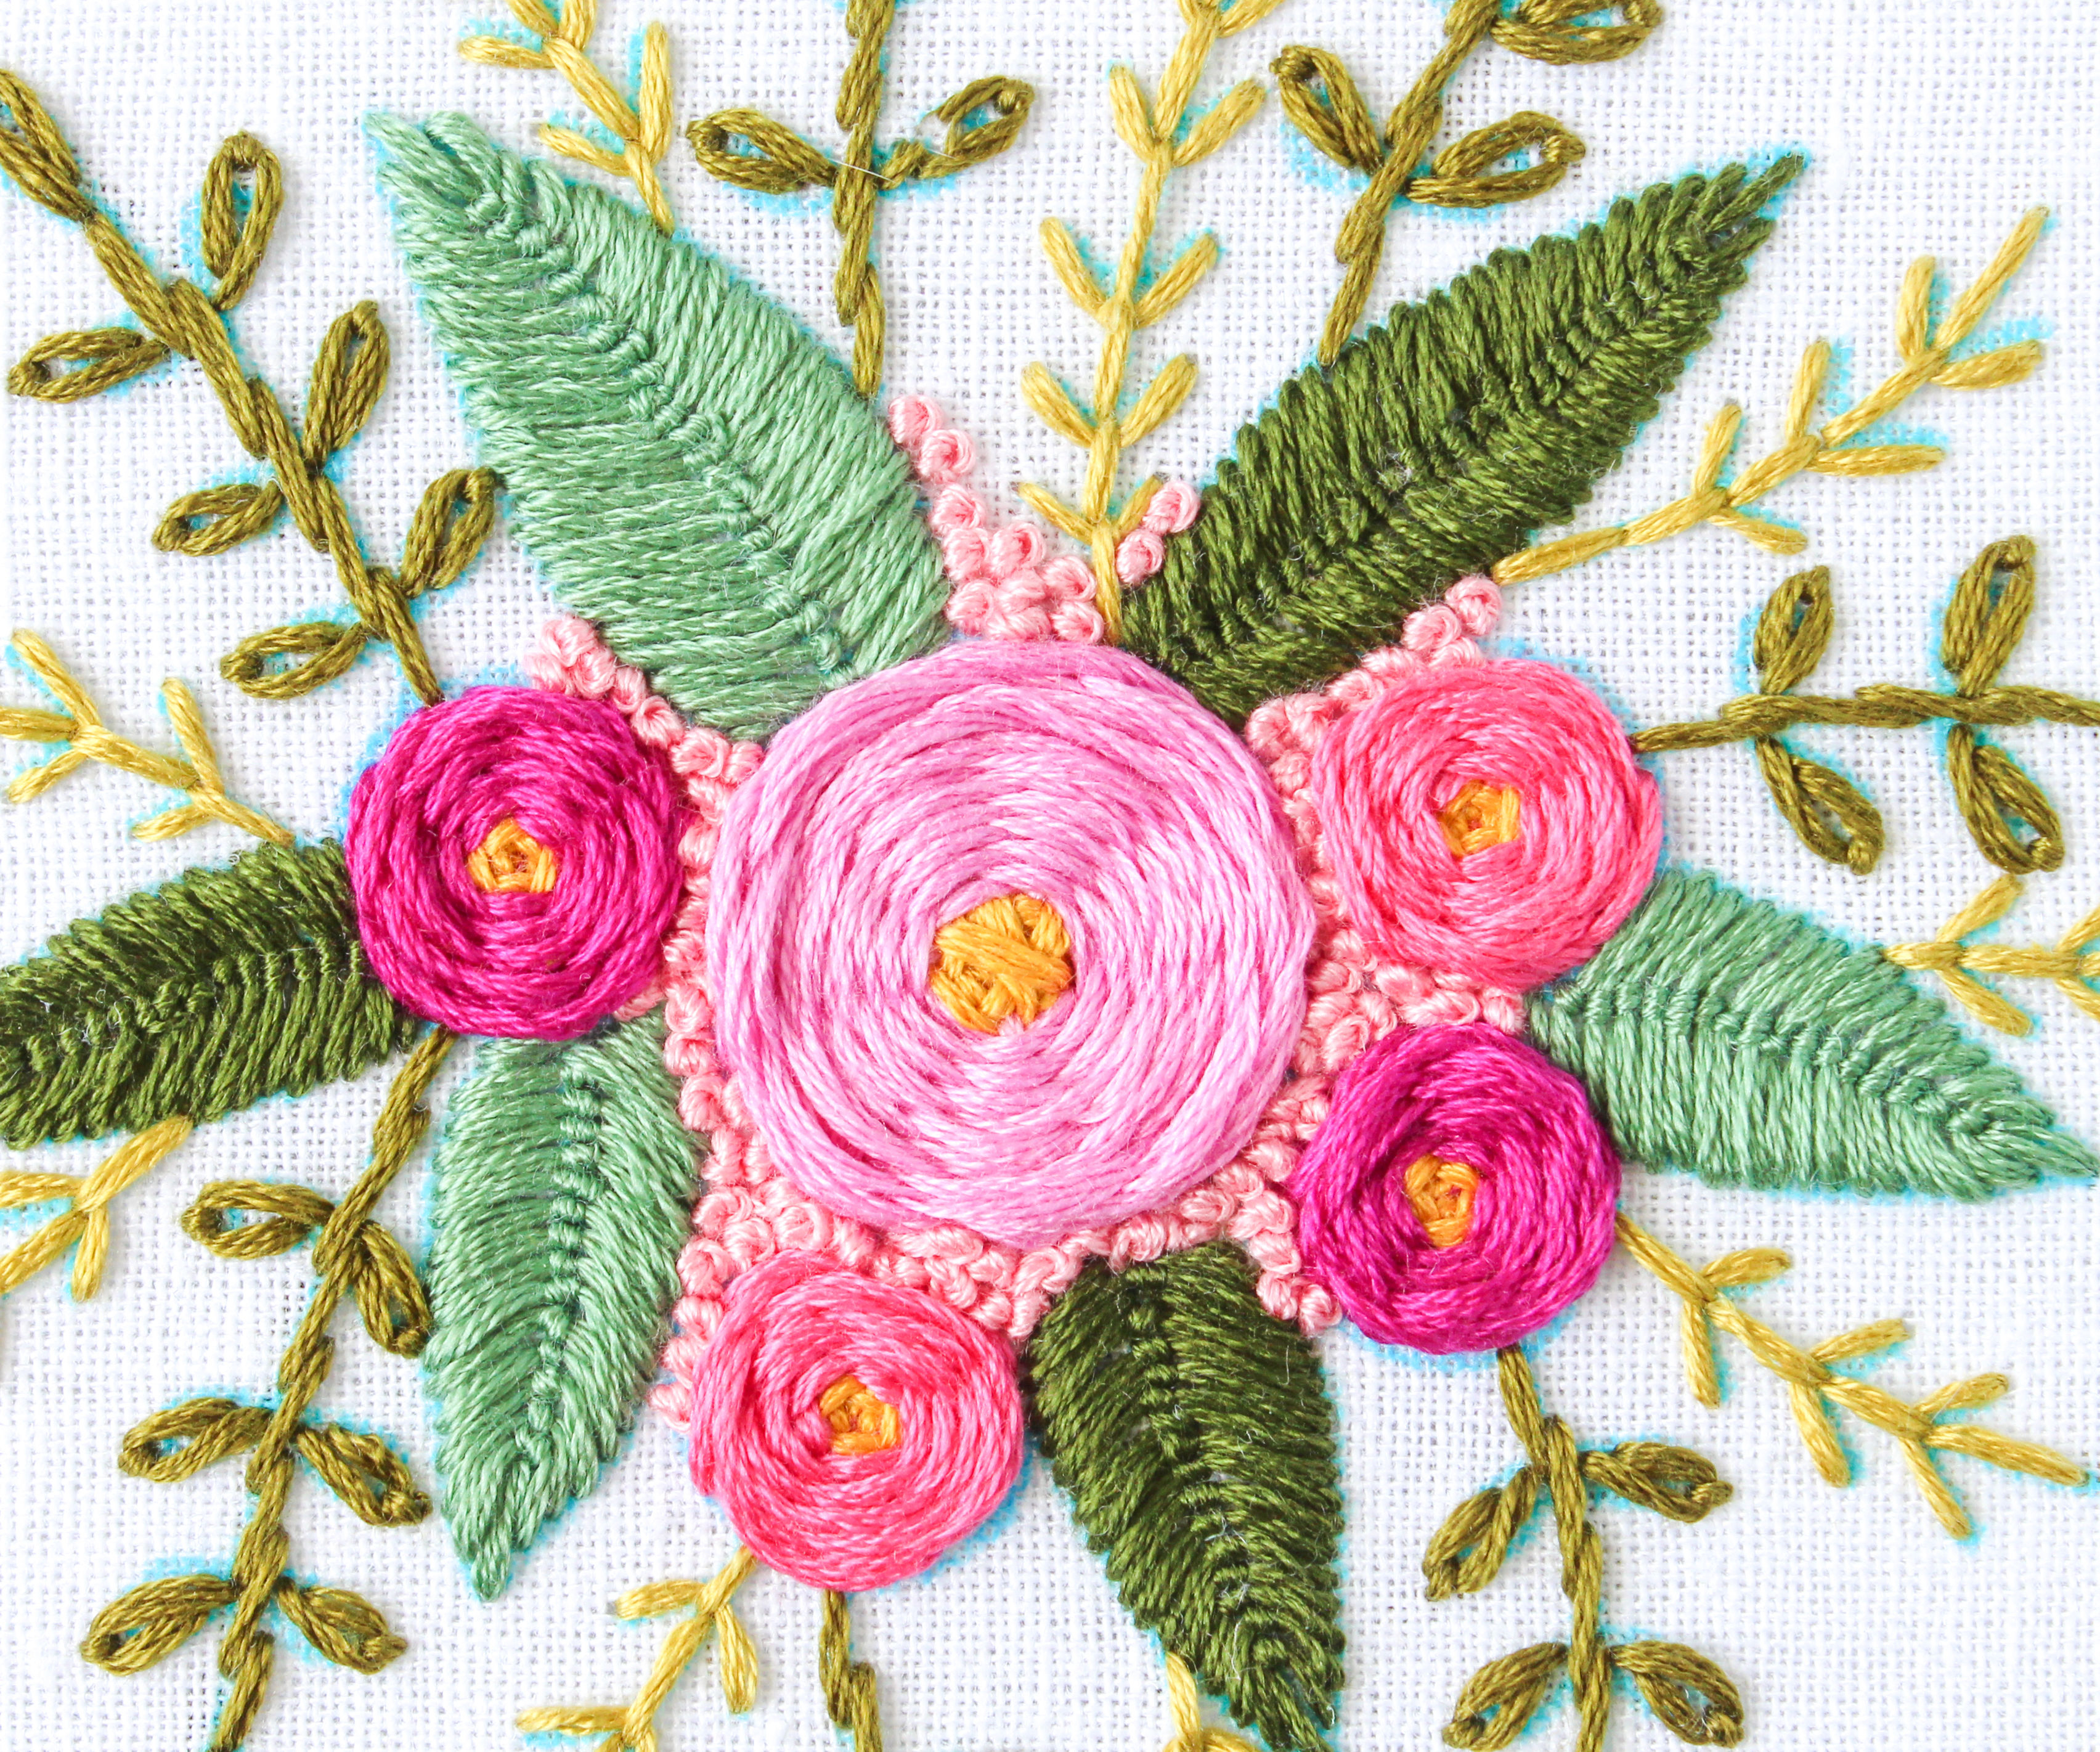 Embroidery Flower Pattern How To Hand Embroider Flowers 7 Steps With Pictures